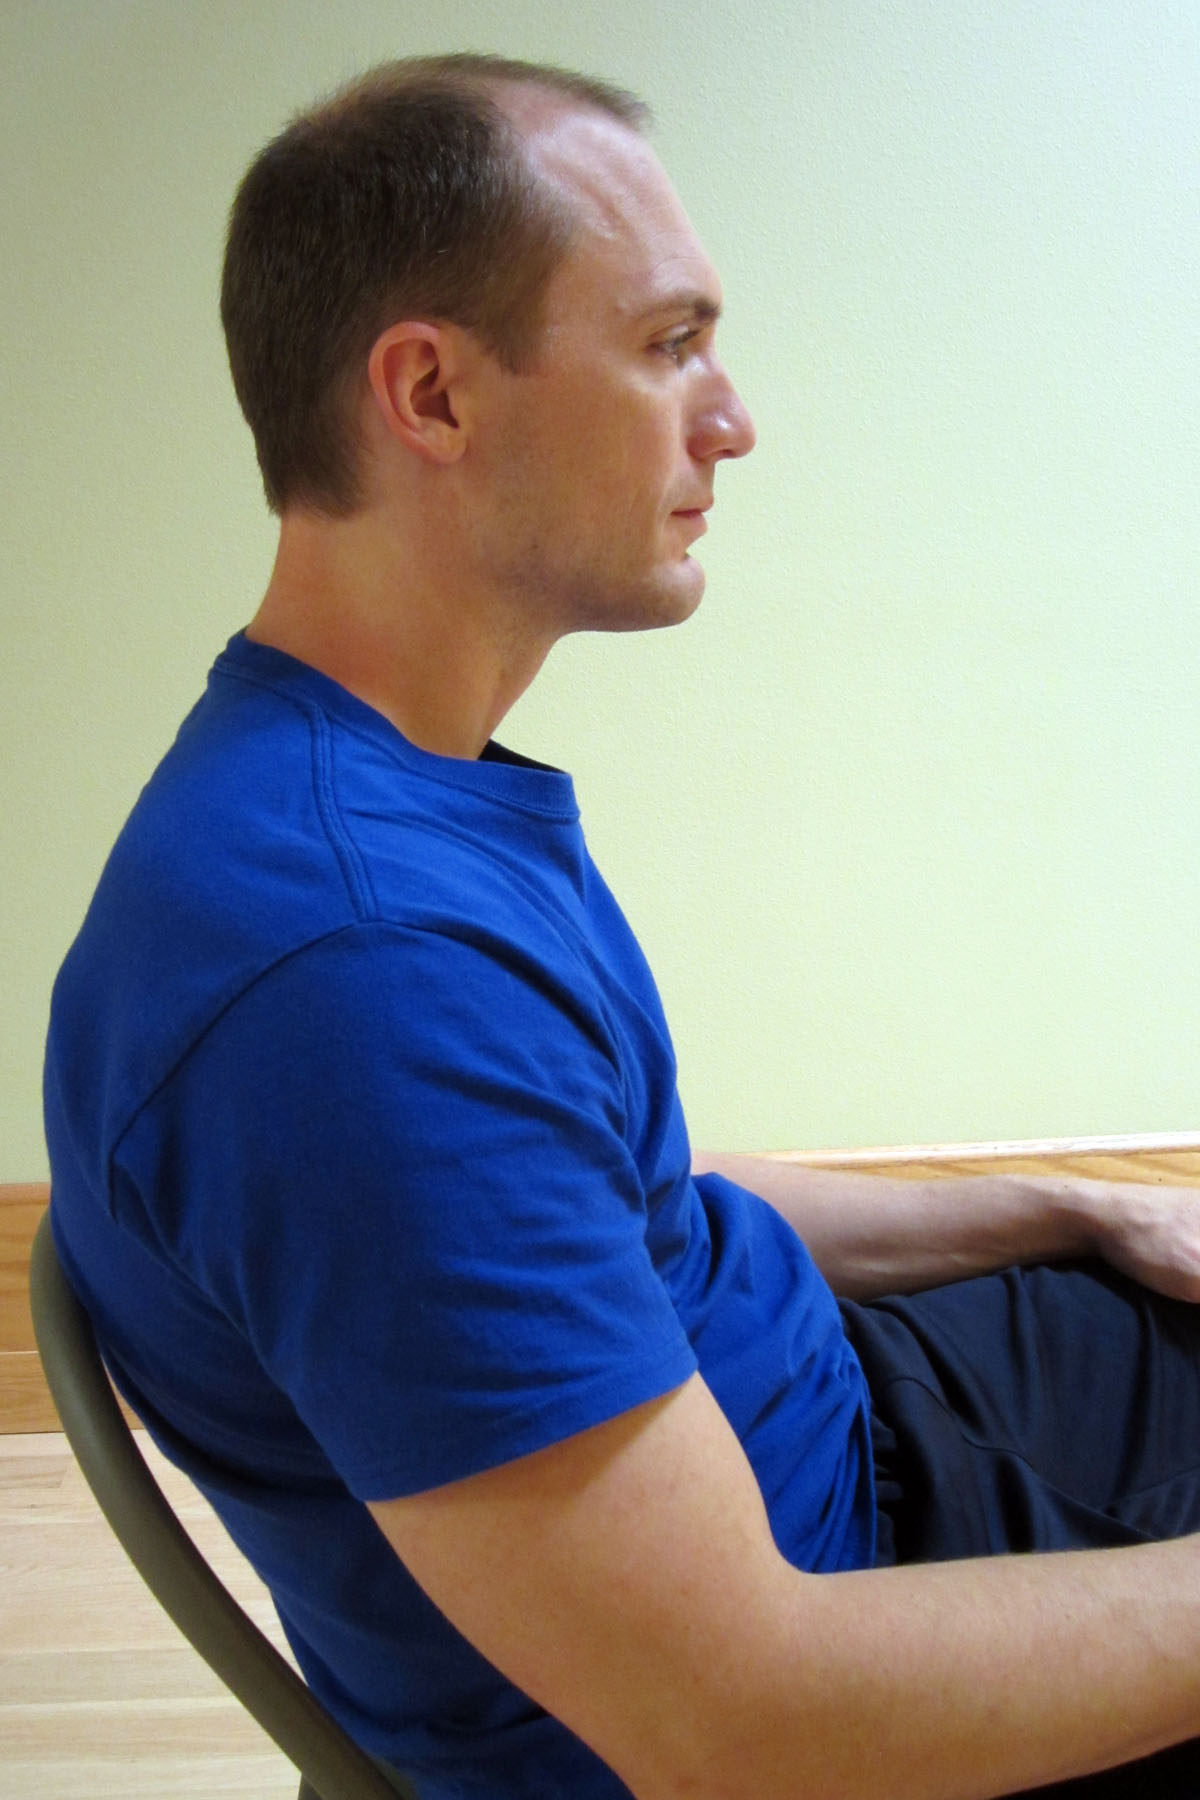 How to Improve Posture & Eliminate Pain